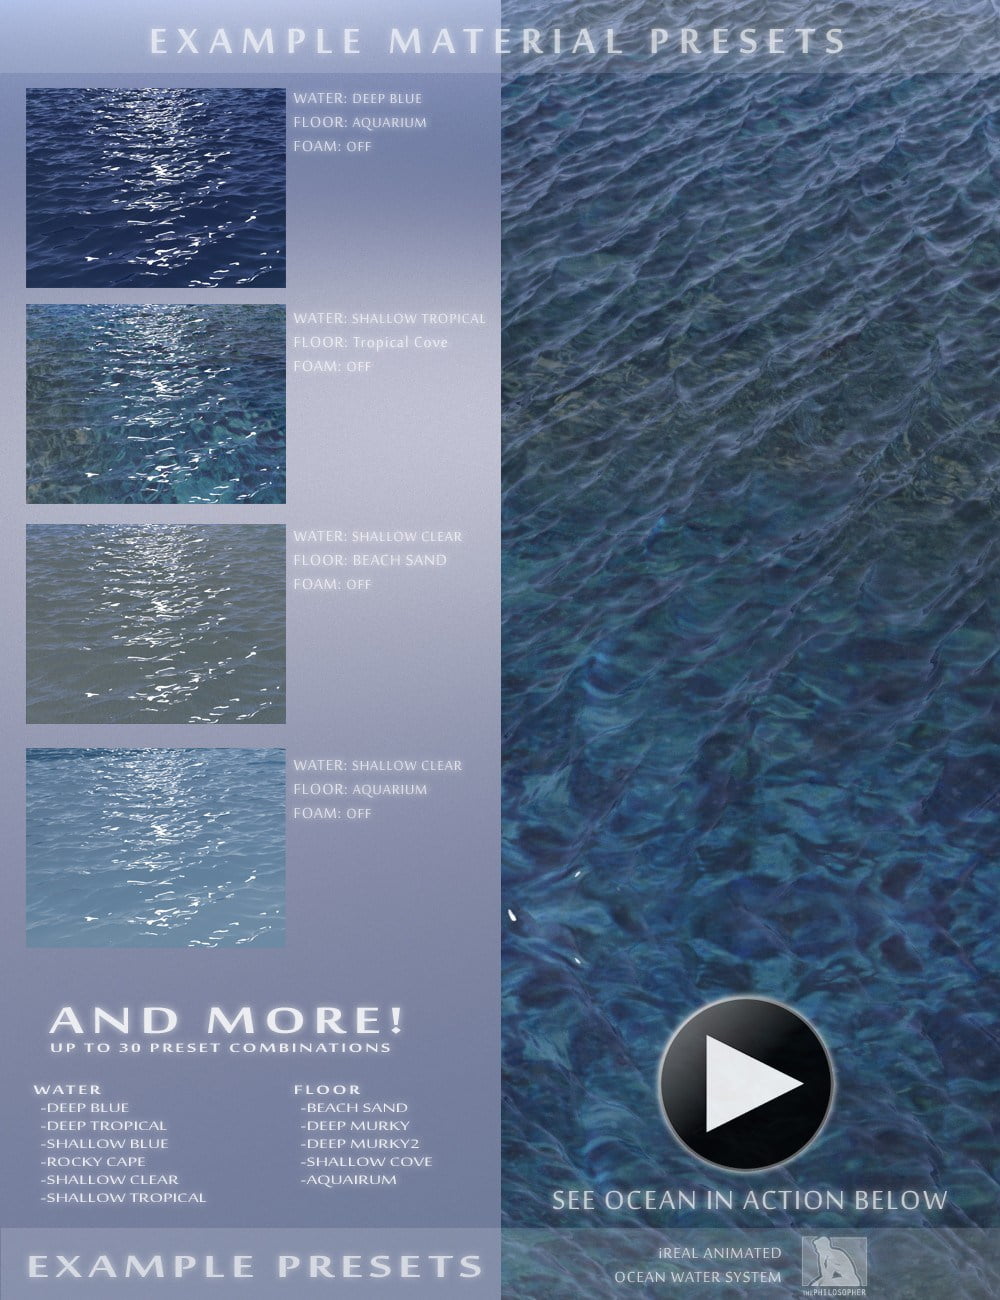 09-ireal-animated-ocean-water-system-daz3d